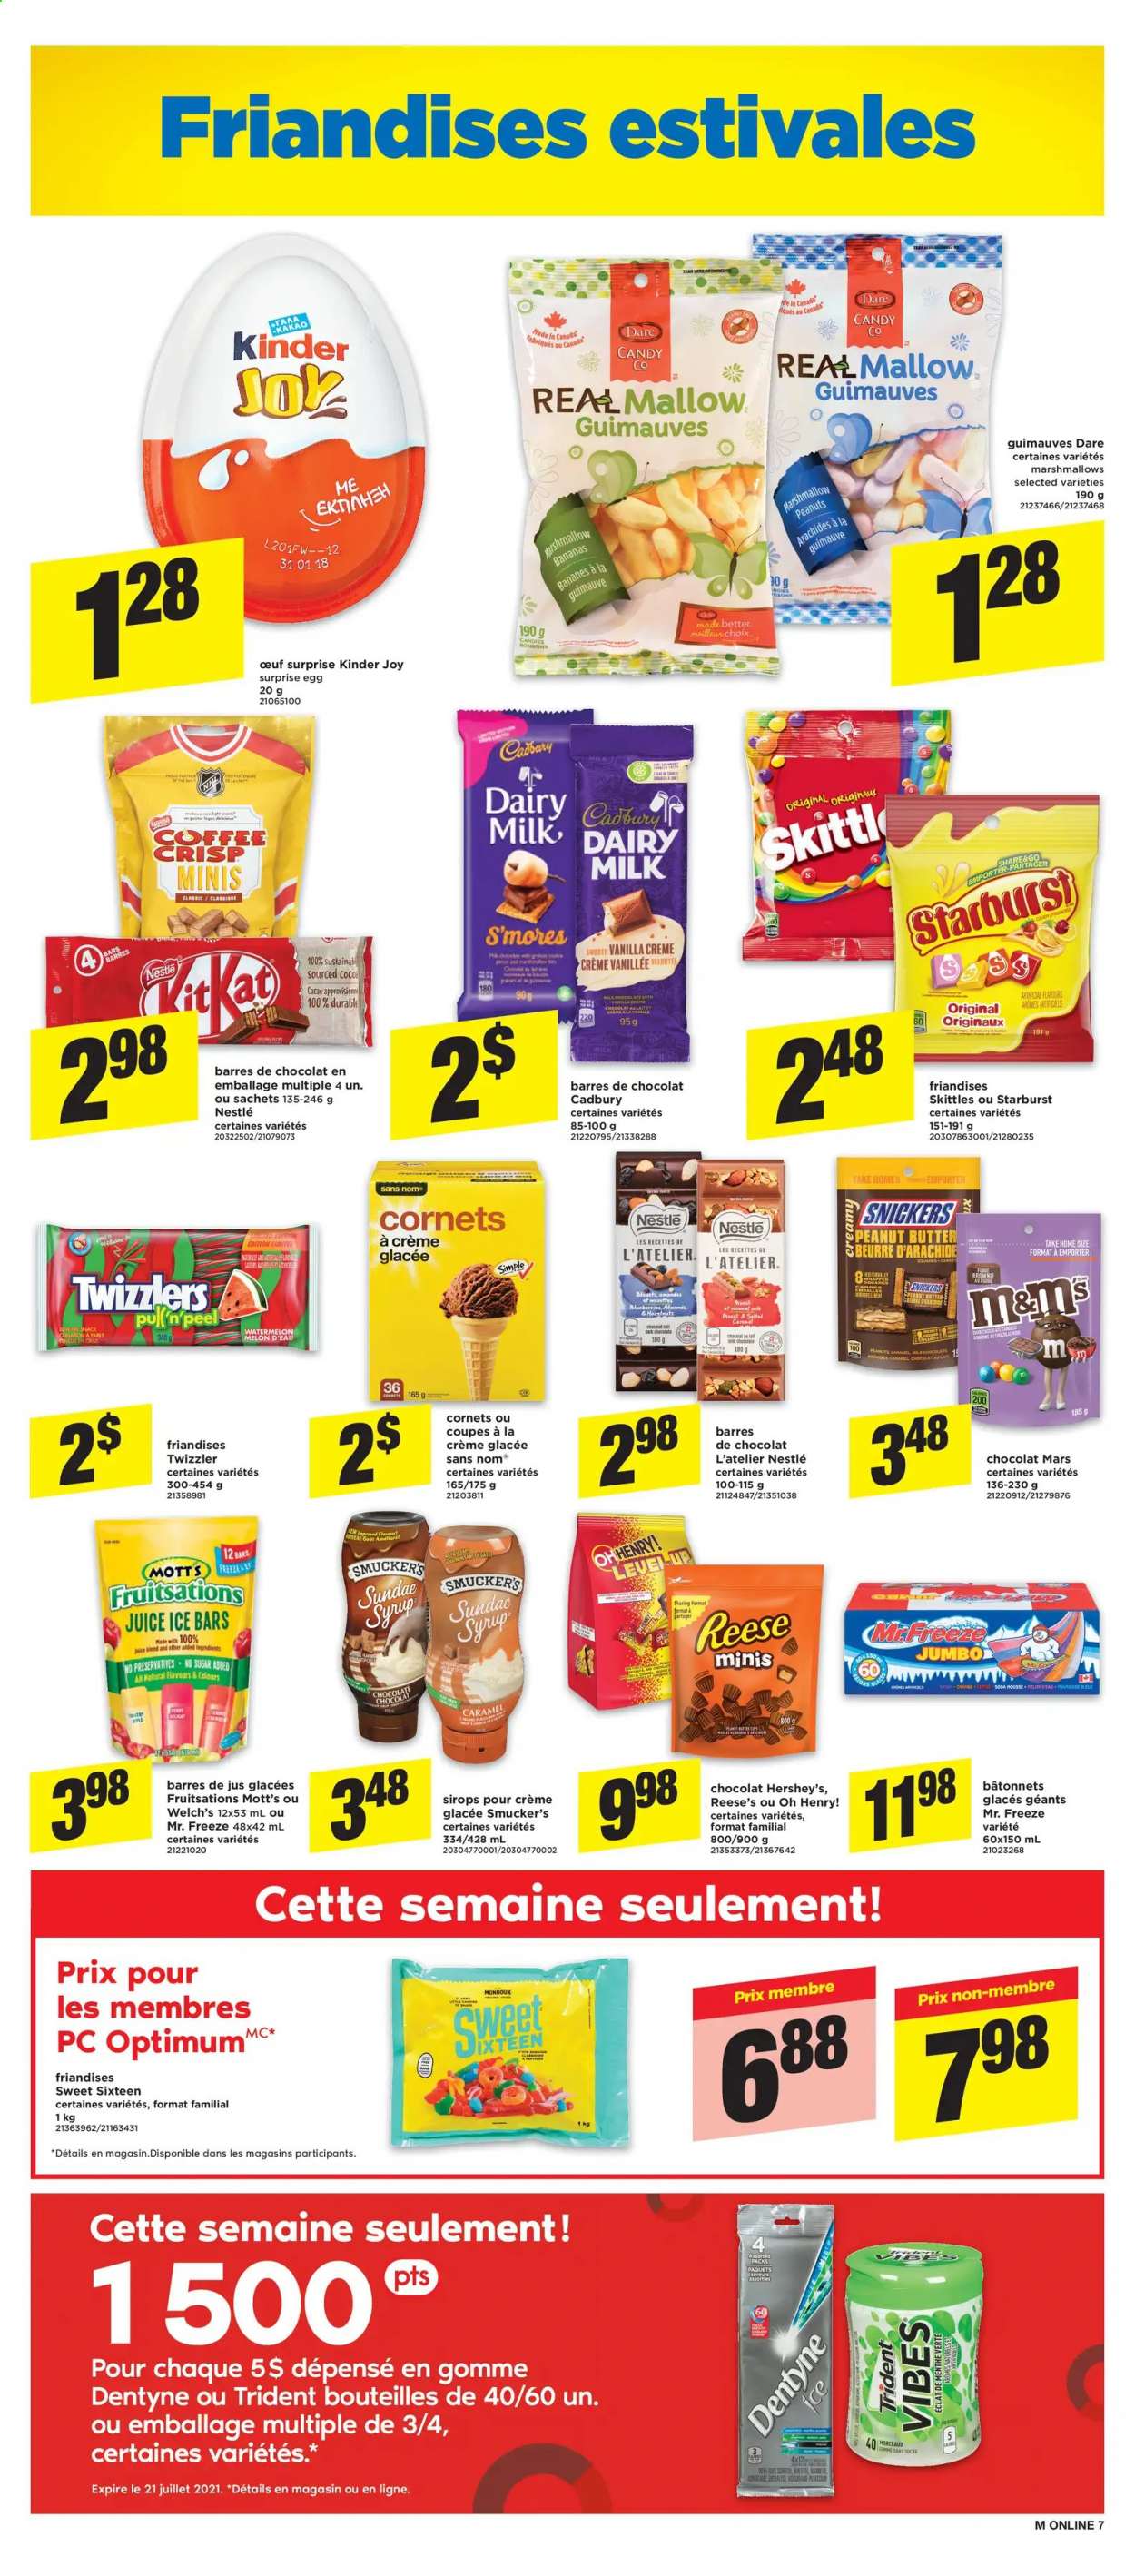 thumbnail - Maxi Flyer - July 15, 2021 - July 21, 2021 - Sales products - brownies, bananas, watermelon, melons, Welch's, Mott's, eggs, Reese's, Hershey's, marshmallows, milk chocolate, chocolate, snack, Kinder Joy, Snickers, Mars, dark chocolate, Cadbury, Skittles, Trident, Starburst, caramel, peanut butter, syrup, almonds, juice, soda, coffee, Eclat, Nestlé. Page 12.